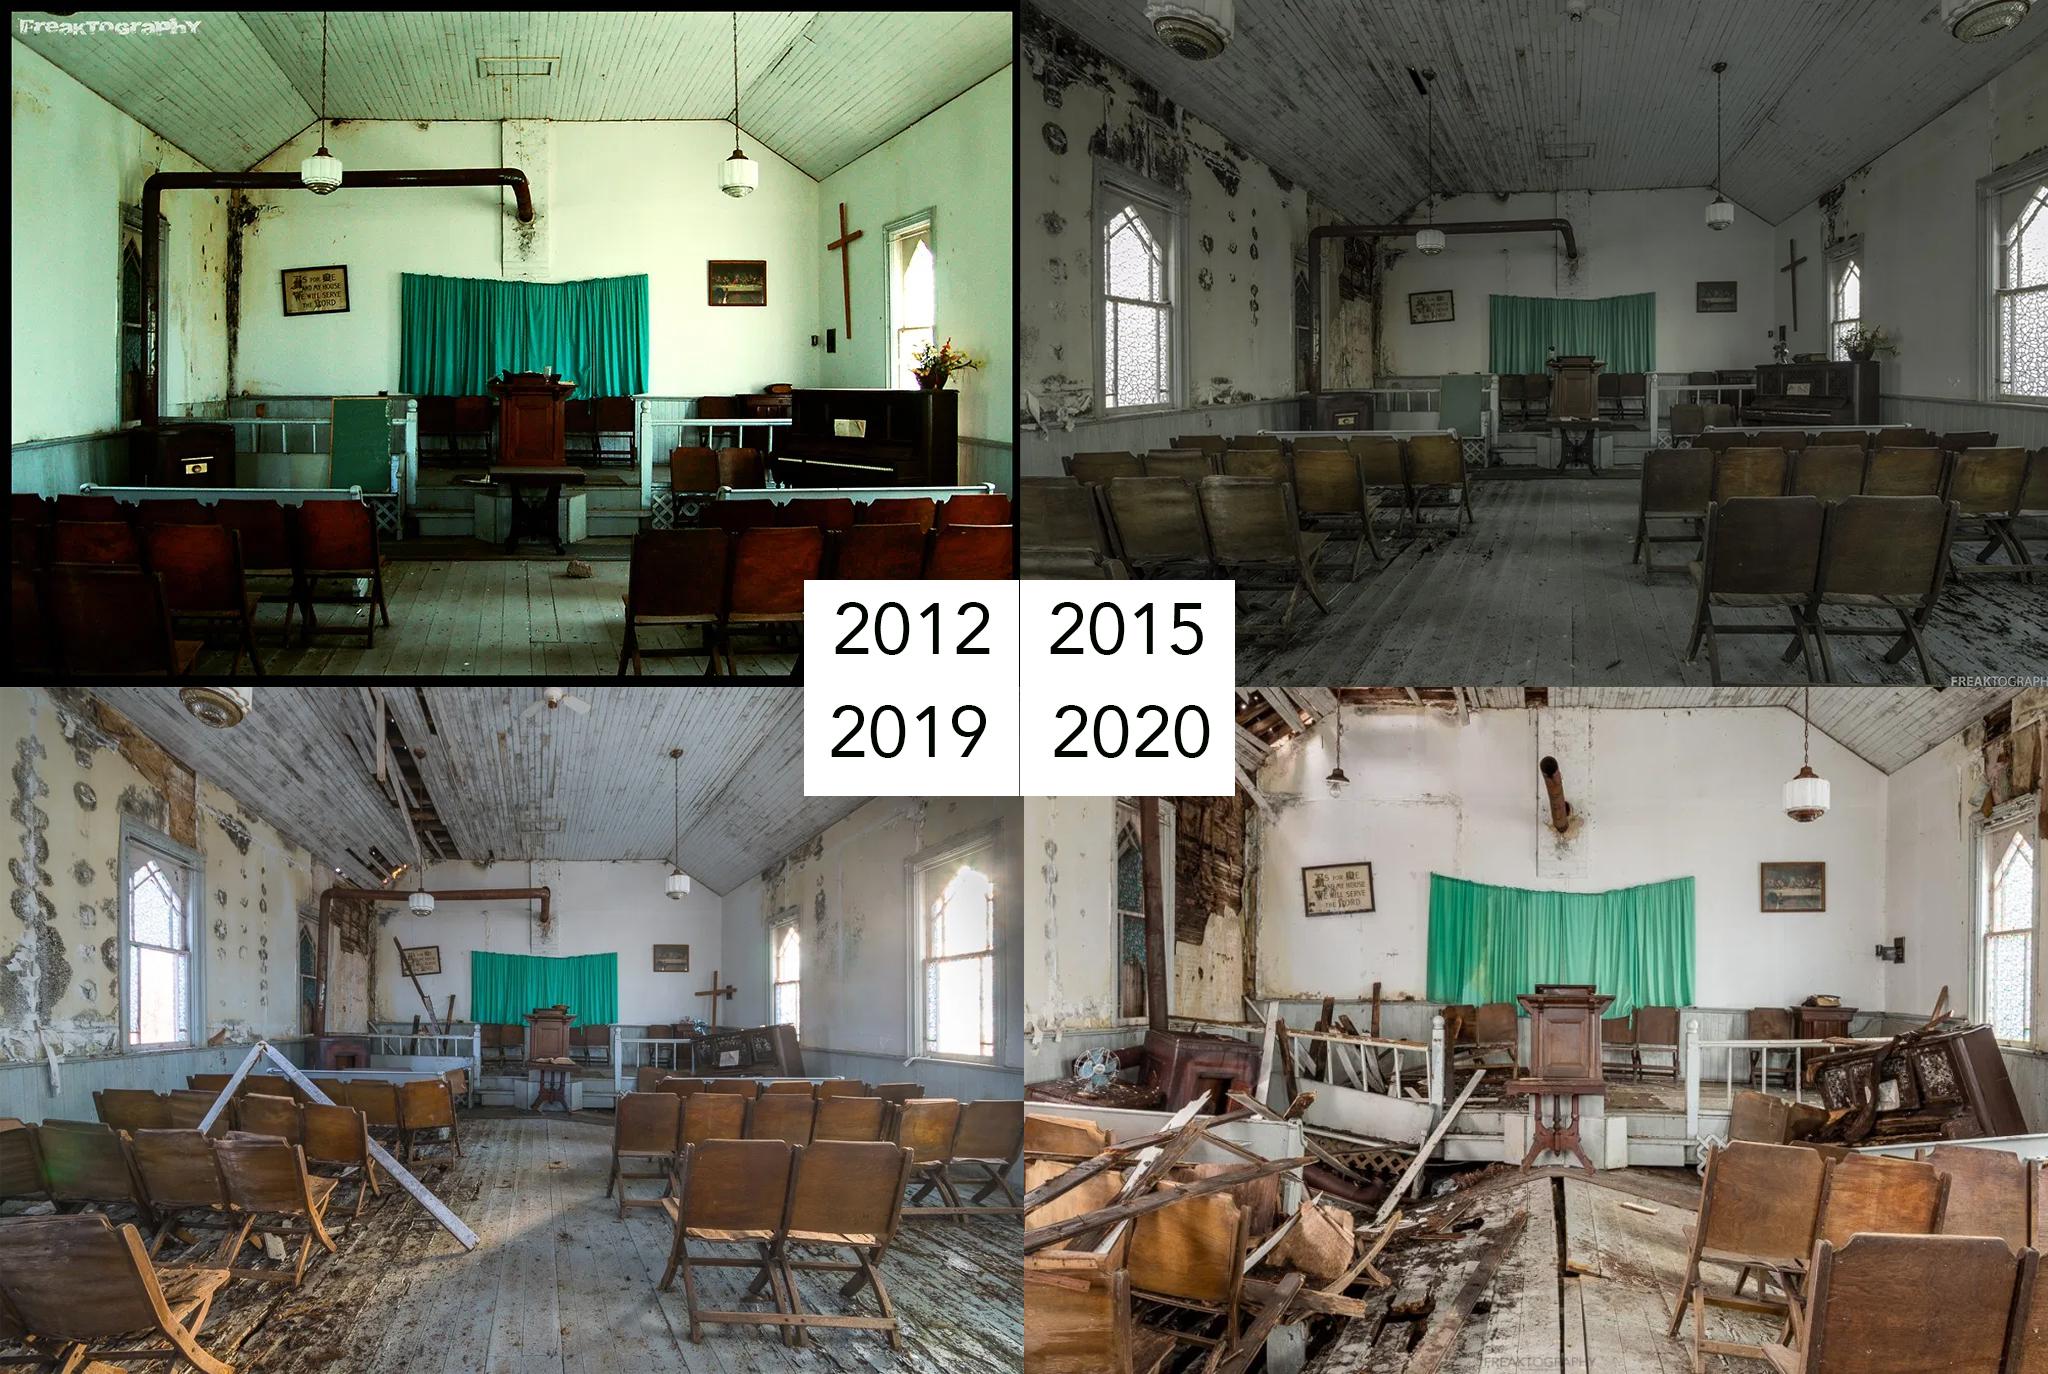 I've been documenting the natural decay in this small abandoned church since 2012